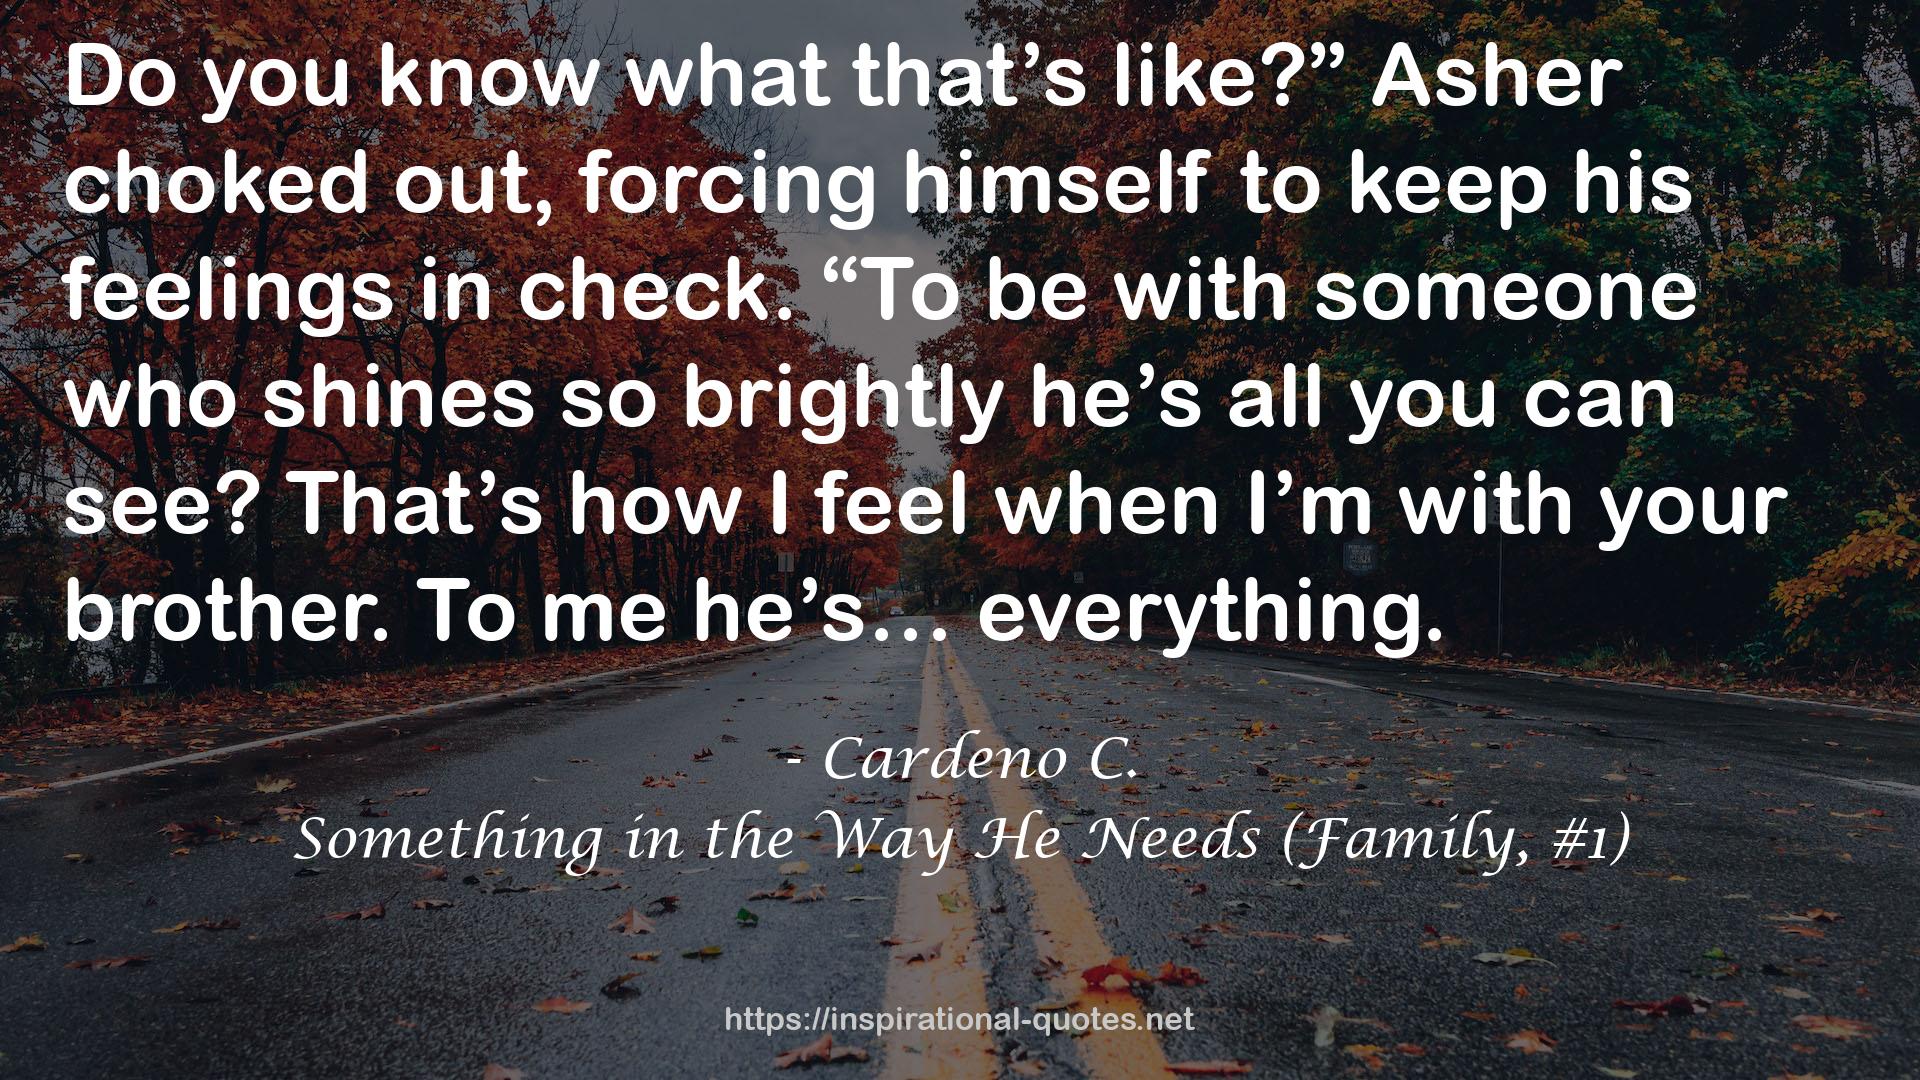 Something in the Way He Needs (Family, #1) QUOTES